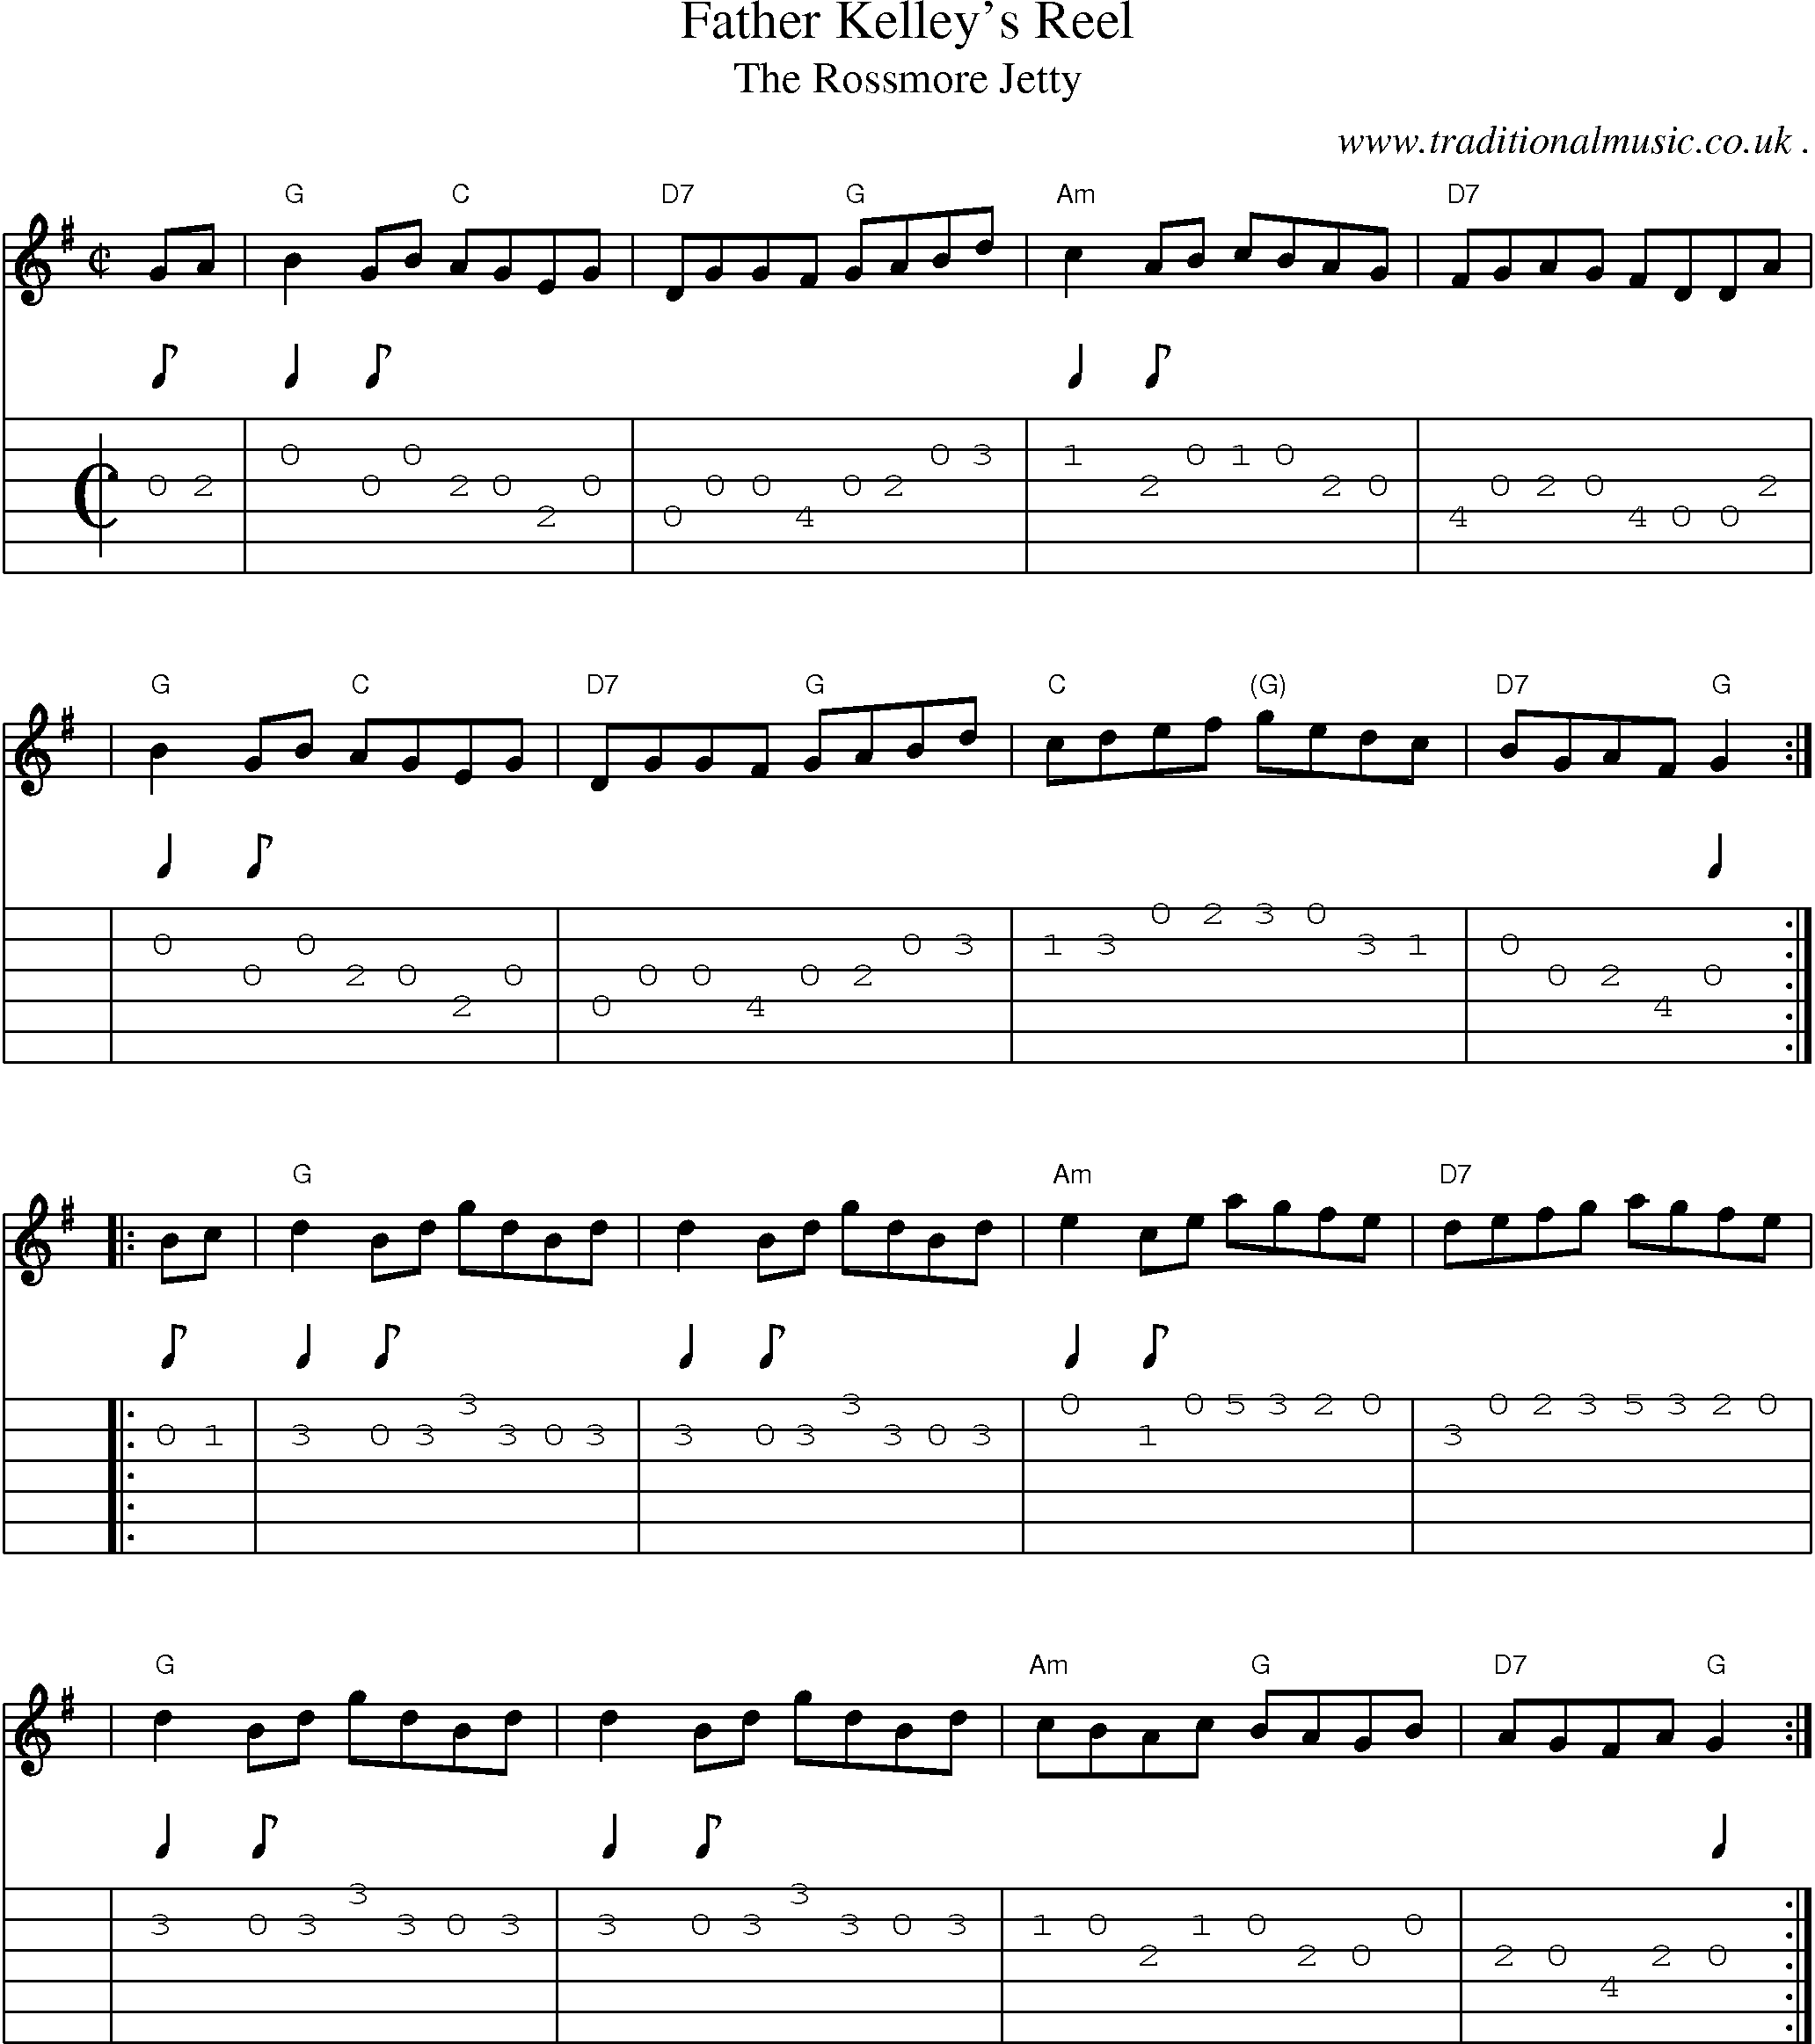 Sheet-music  score, Chords and Guitar Tabs for Father Kelleys Reel